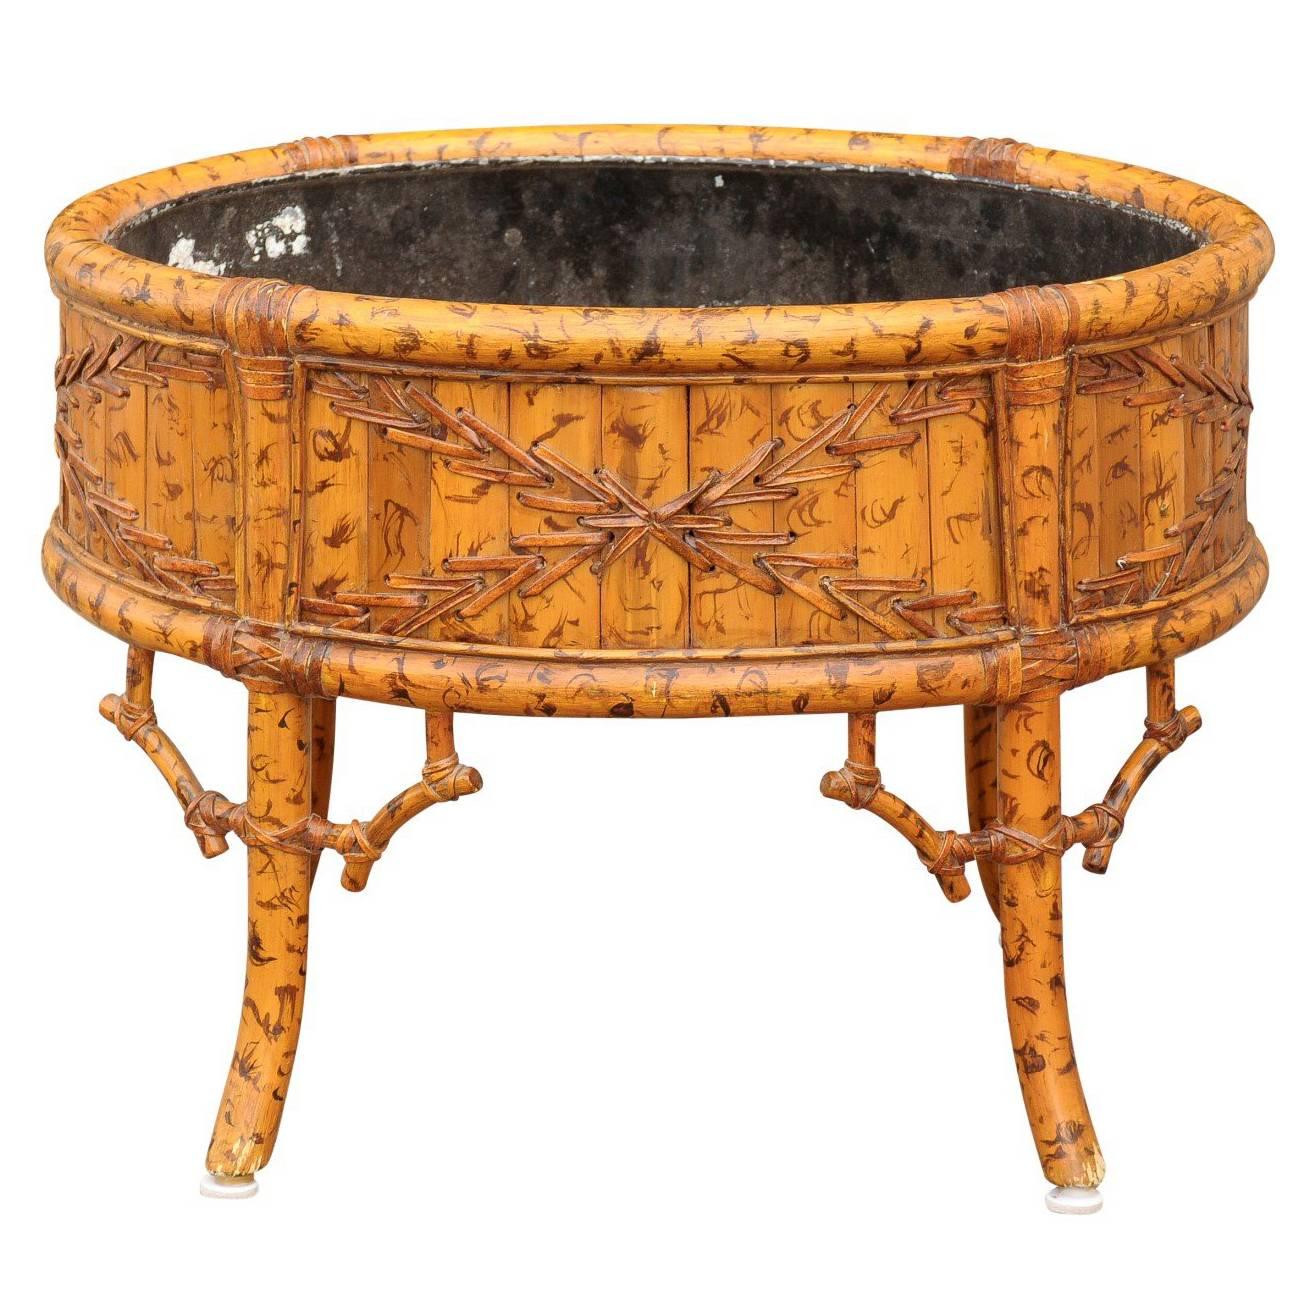 French Faux-Bamboo Round Turn of the Century Jardinière on Legs with Liner